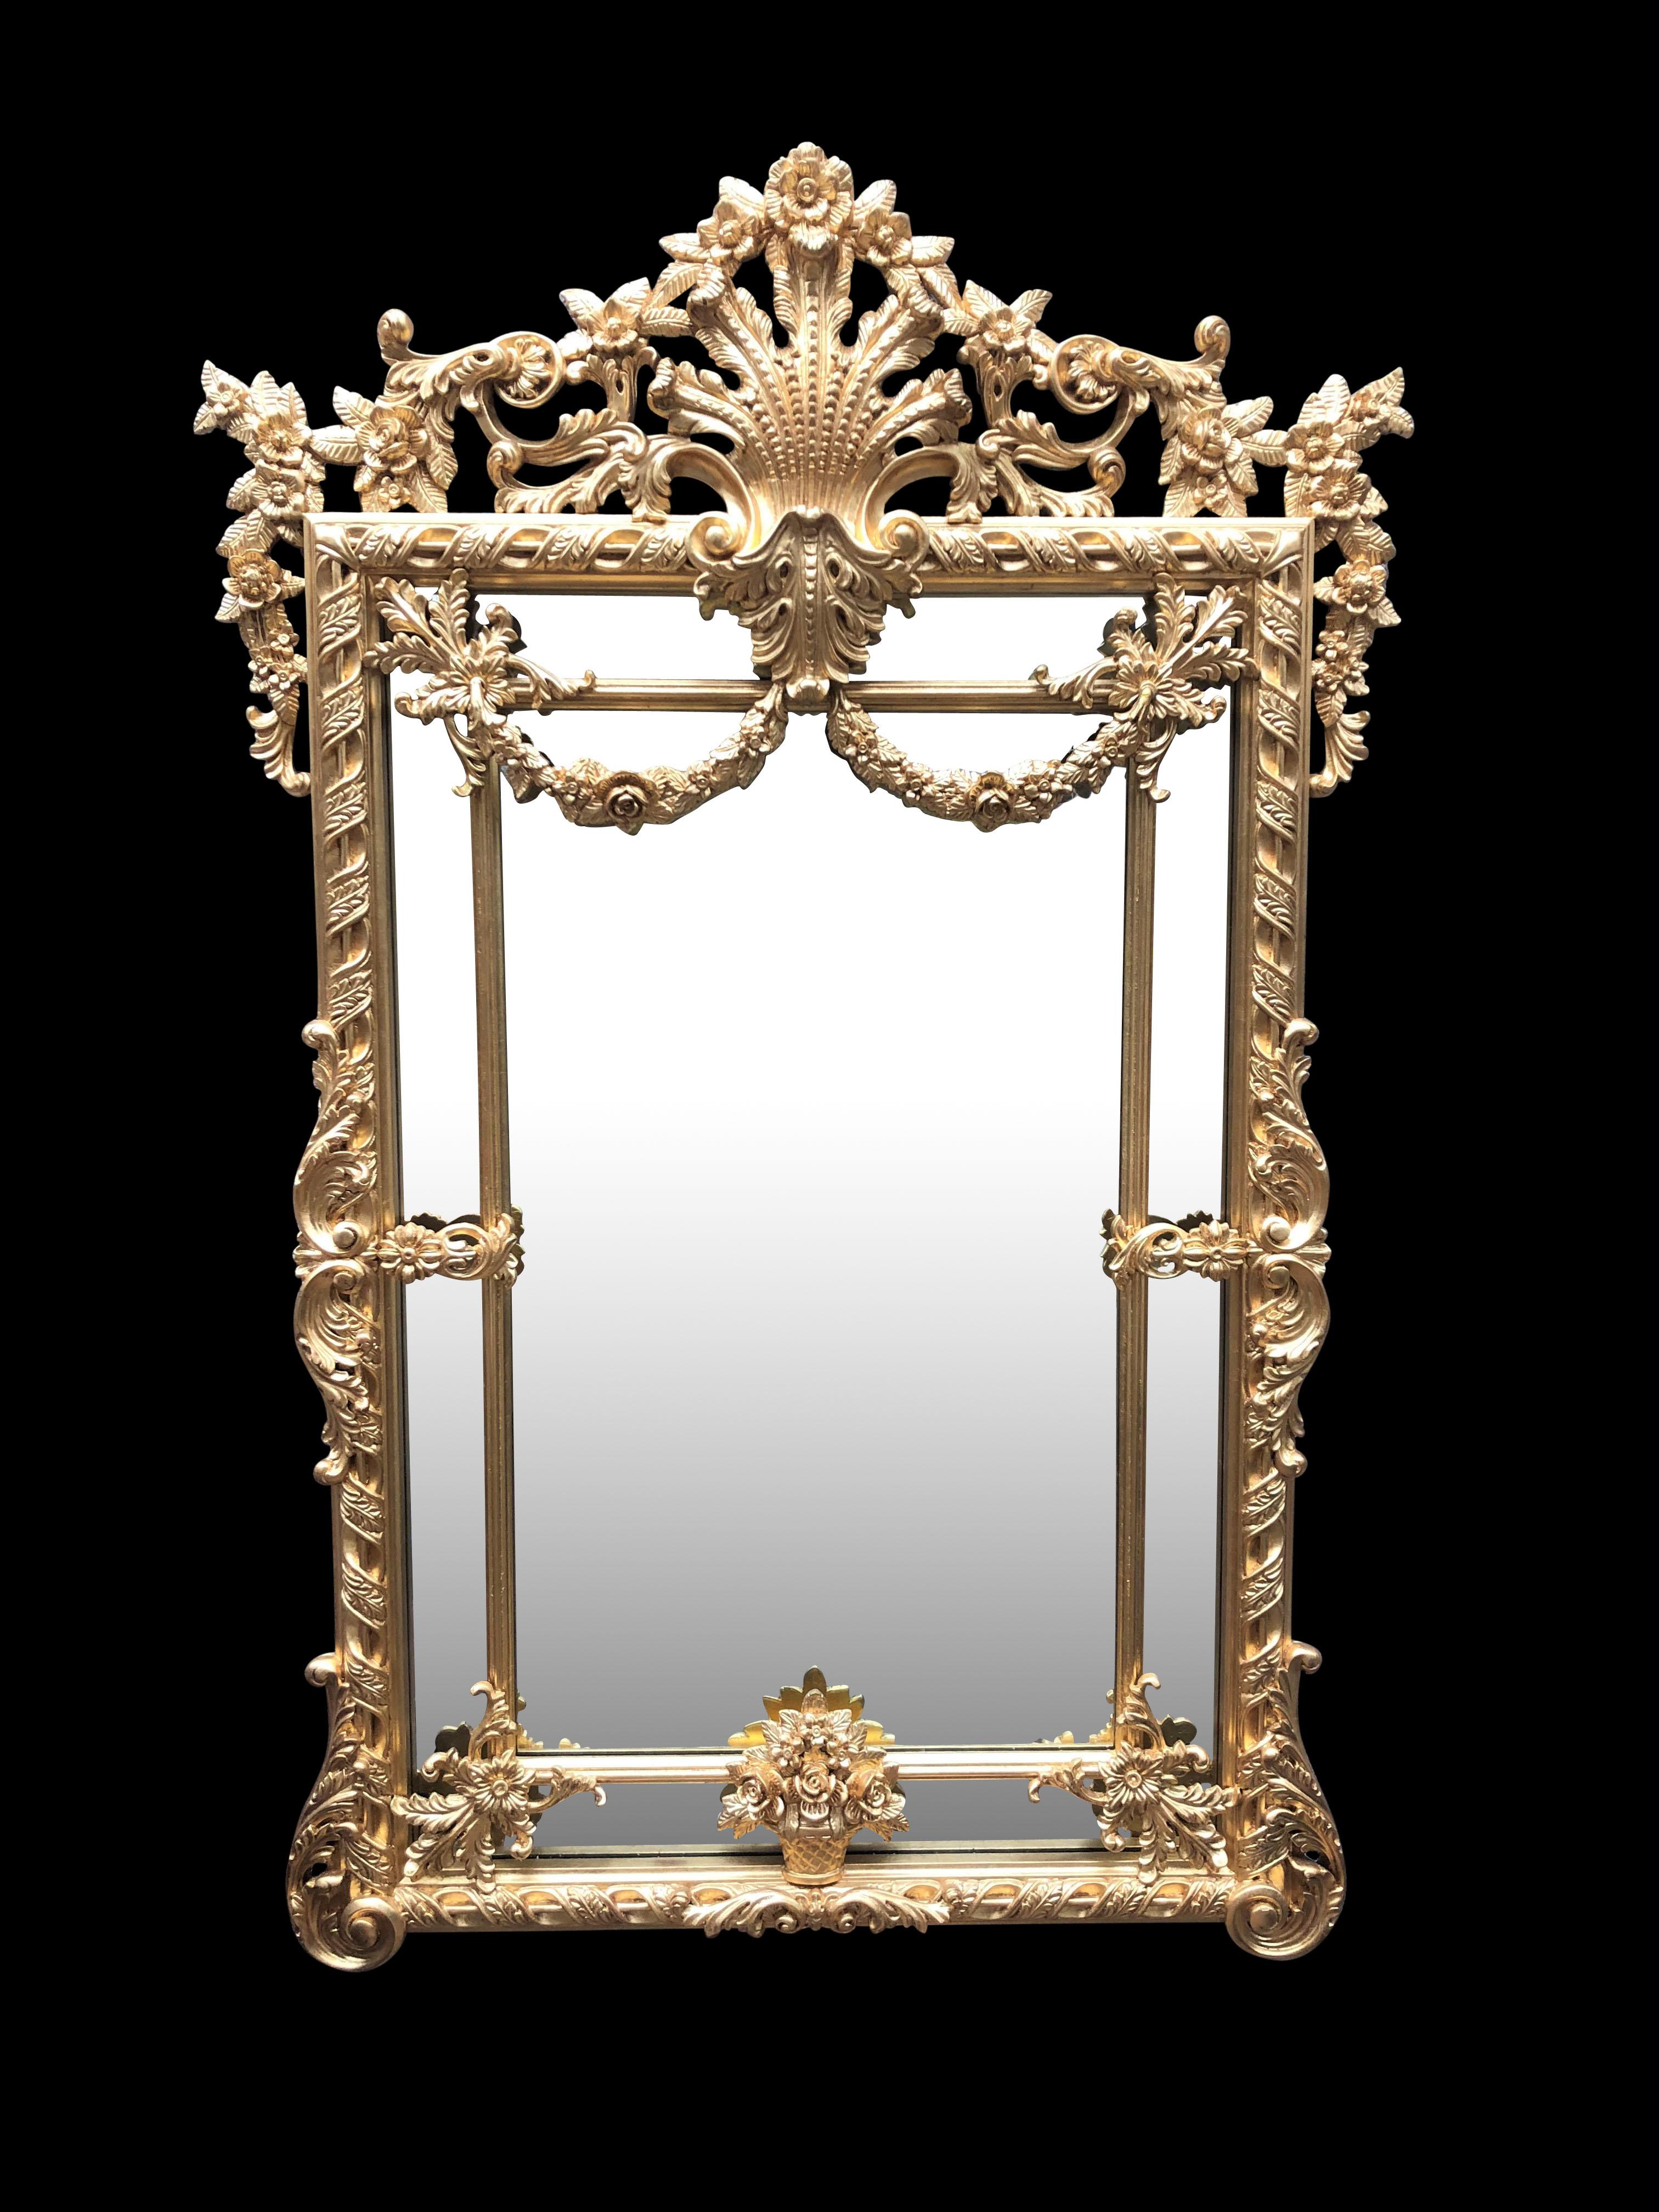 A gorgeous and large George II gilt pier mirror, carved wood, 20th century. Intricate gilt frame with Rococo motifs. Stands over 6 feet tall. Comes in excellent condition.